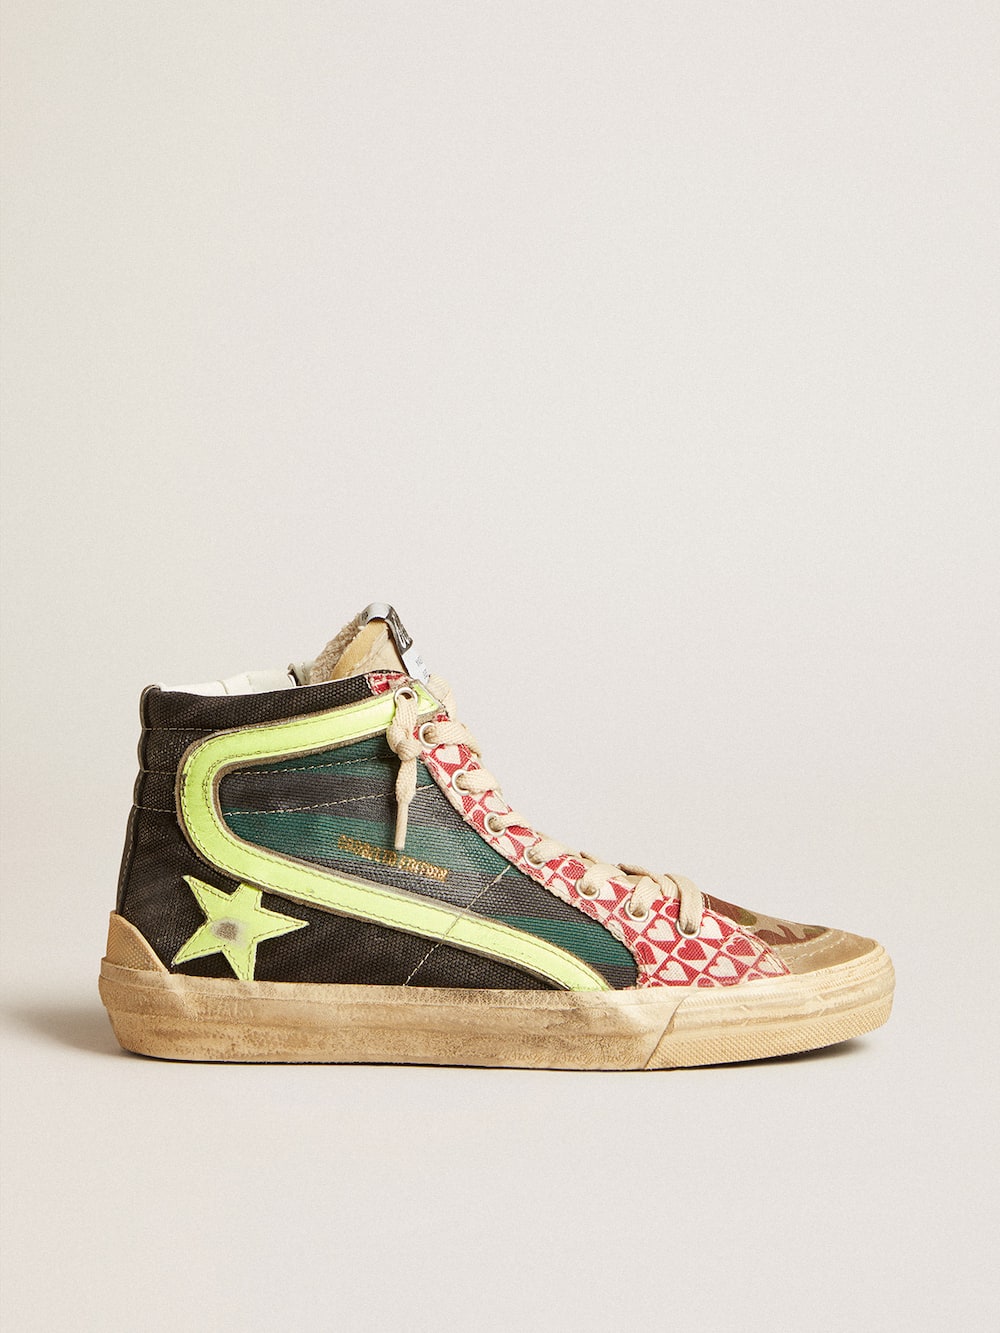 Golden Goose - Women’s Slide LAB in camo canvas with yellow leather star and flash in 